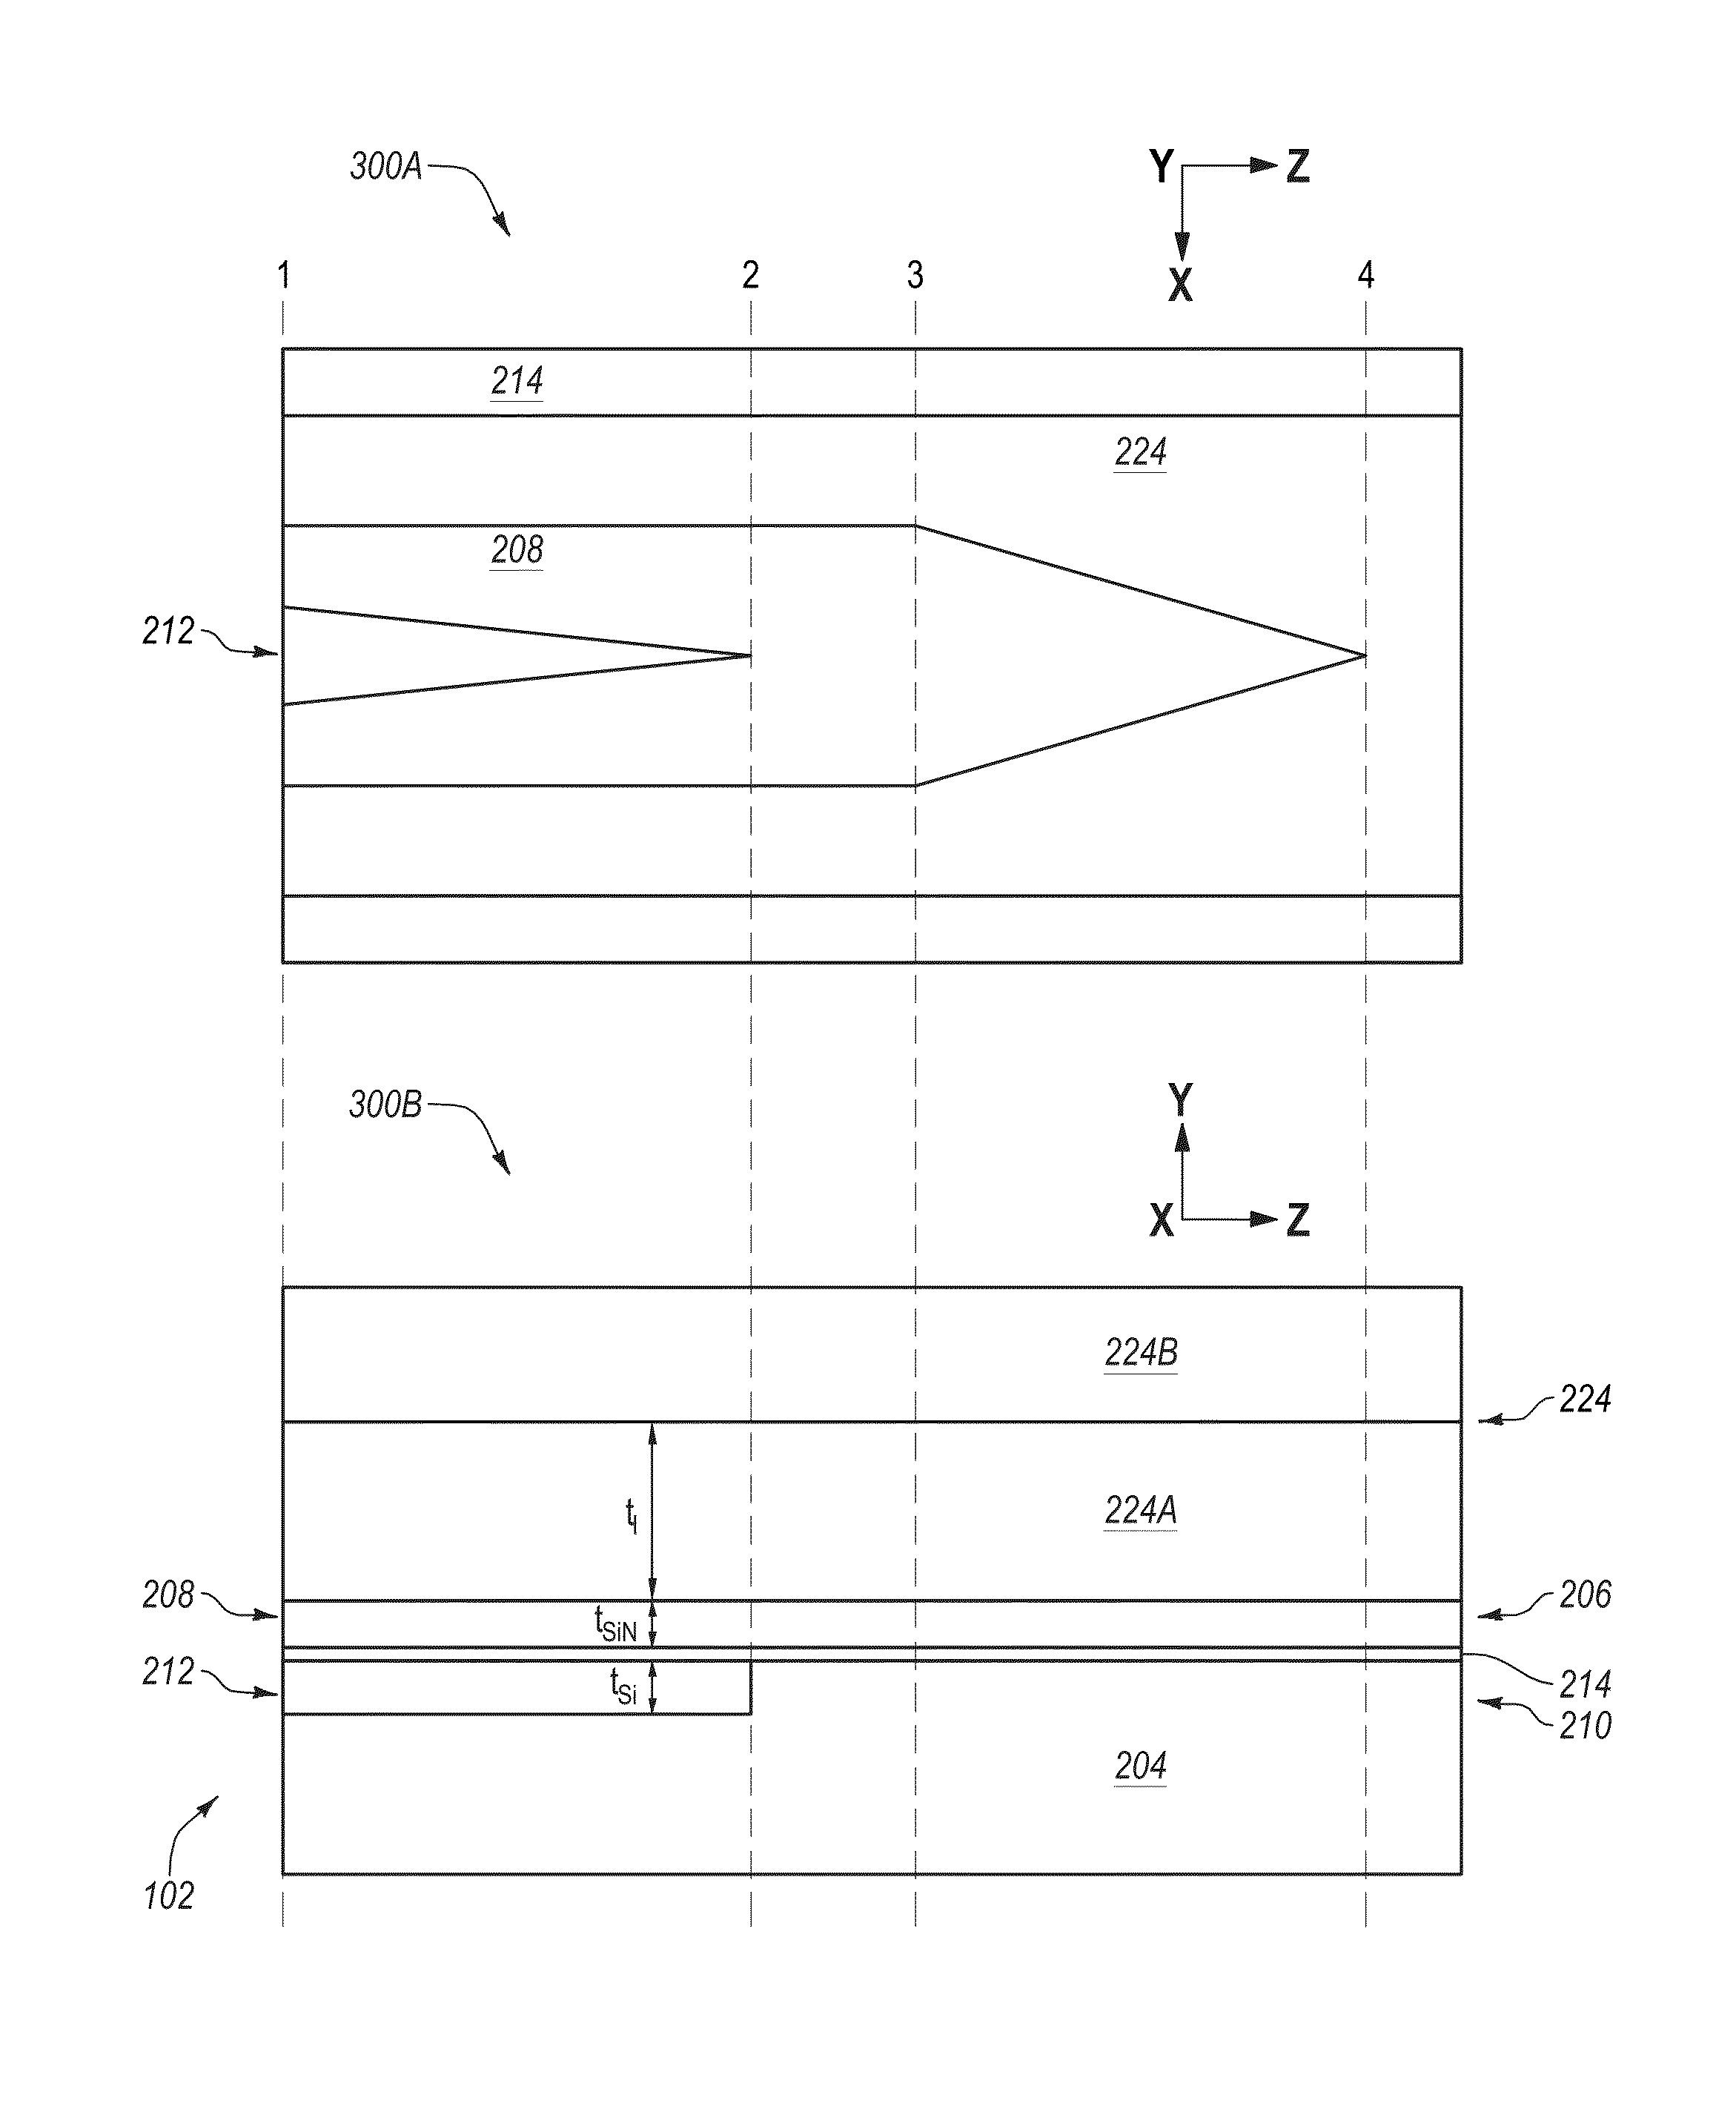 Two-stage adiabatically coupled photonic systems